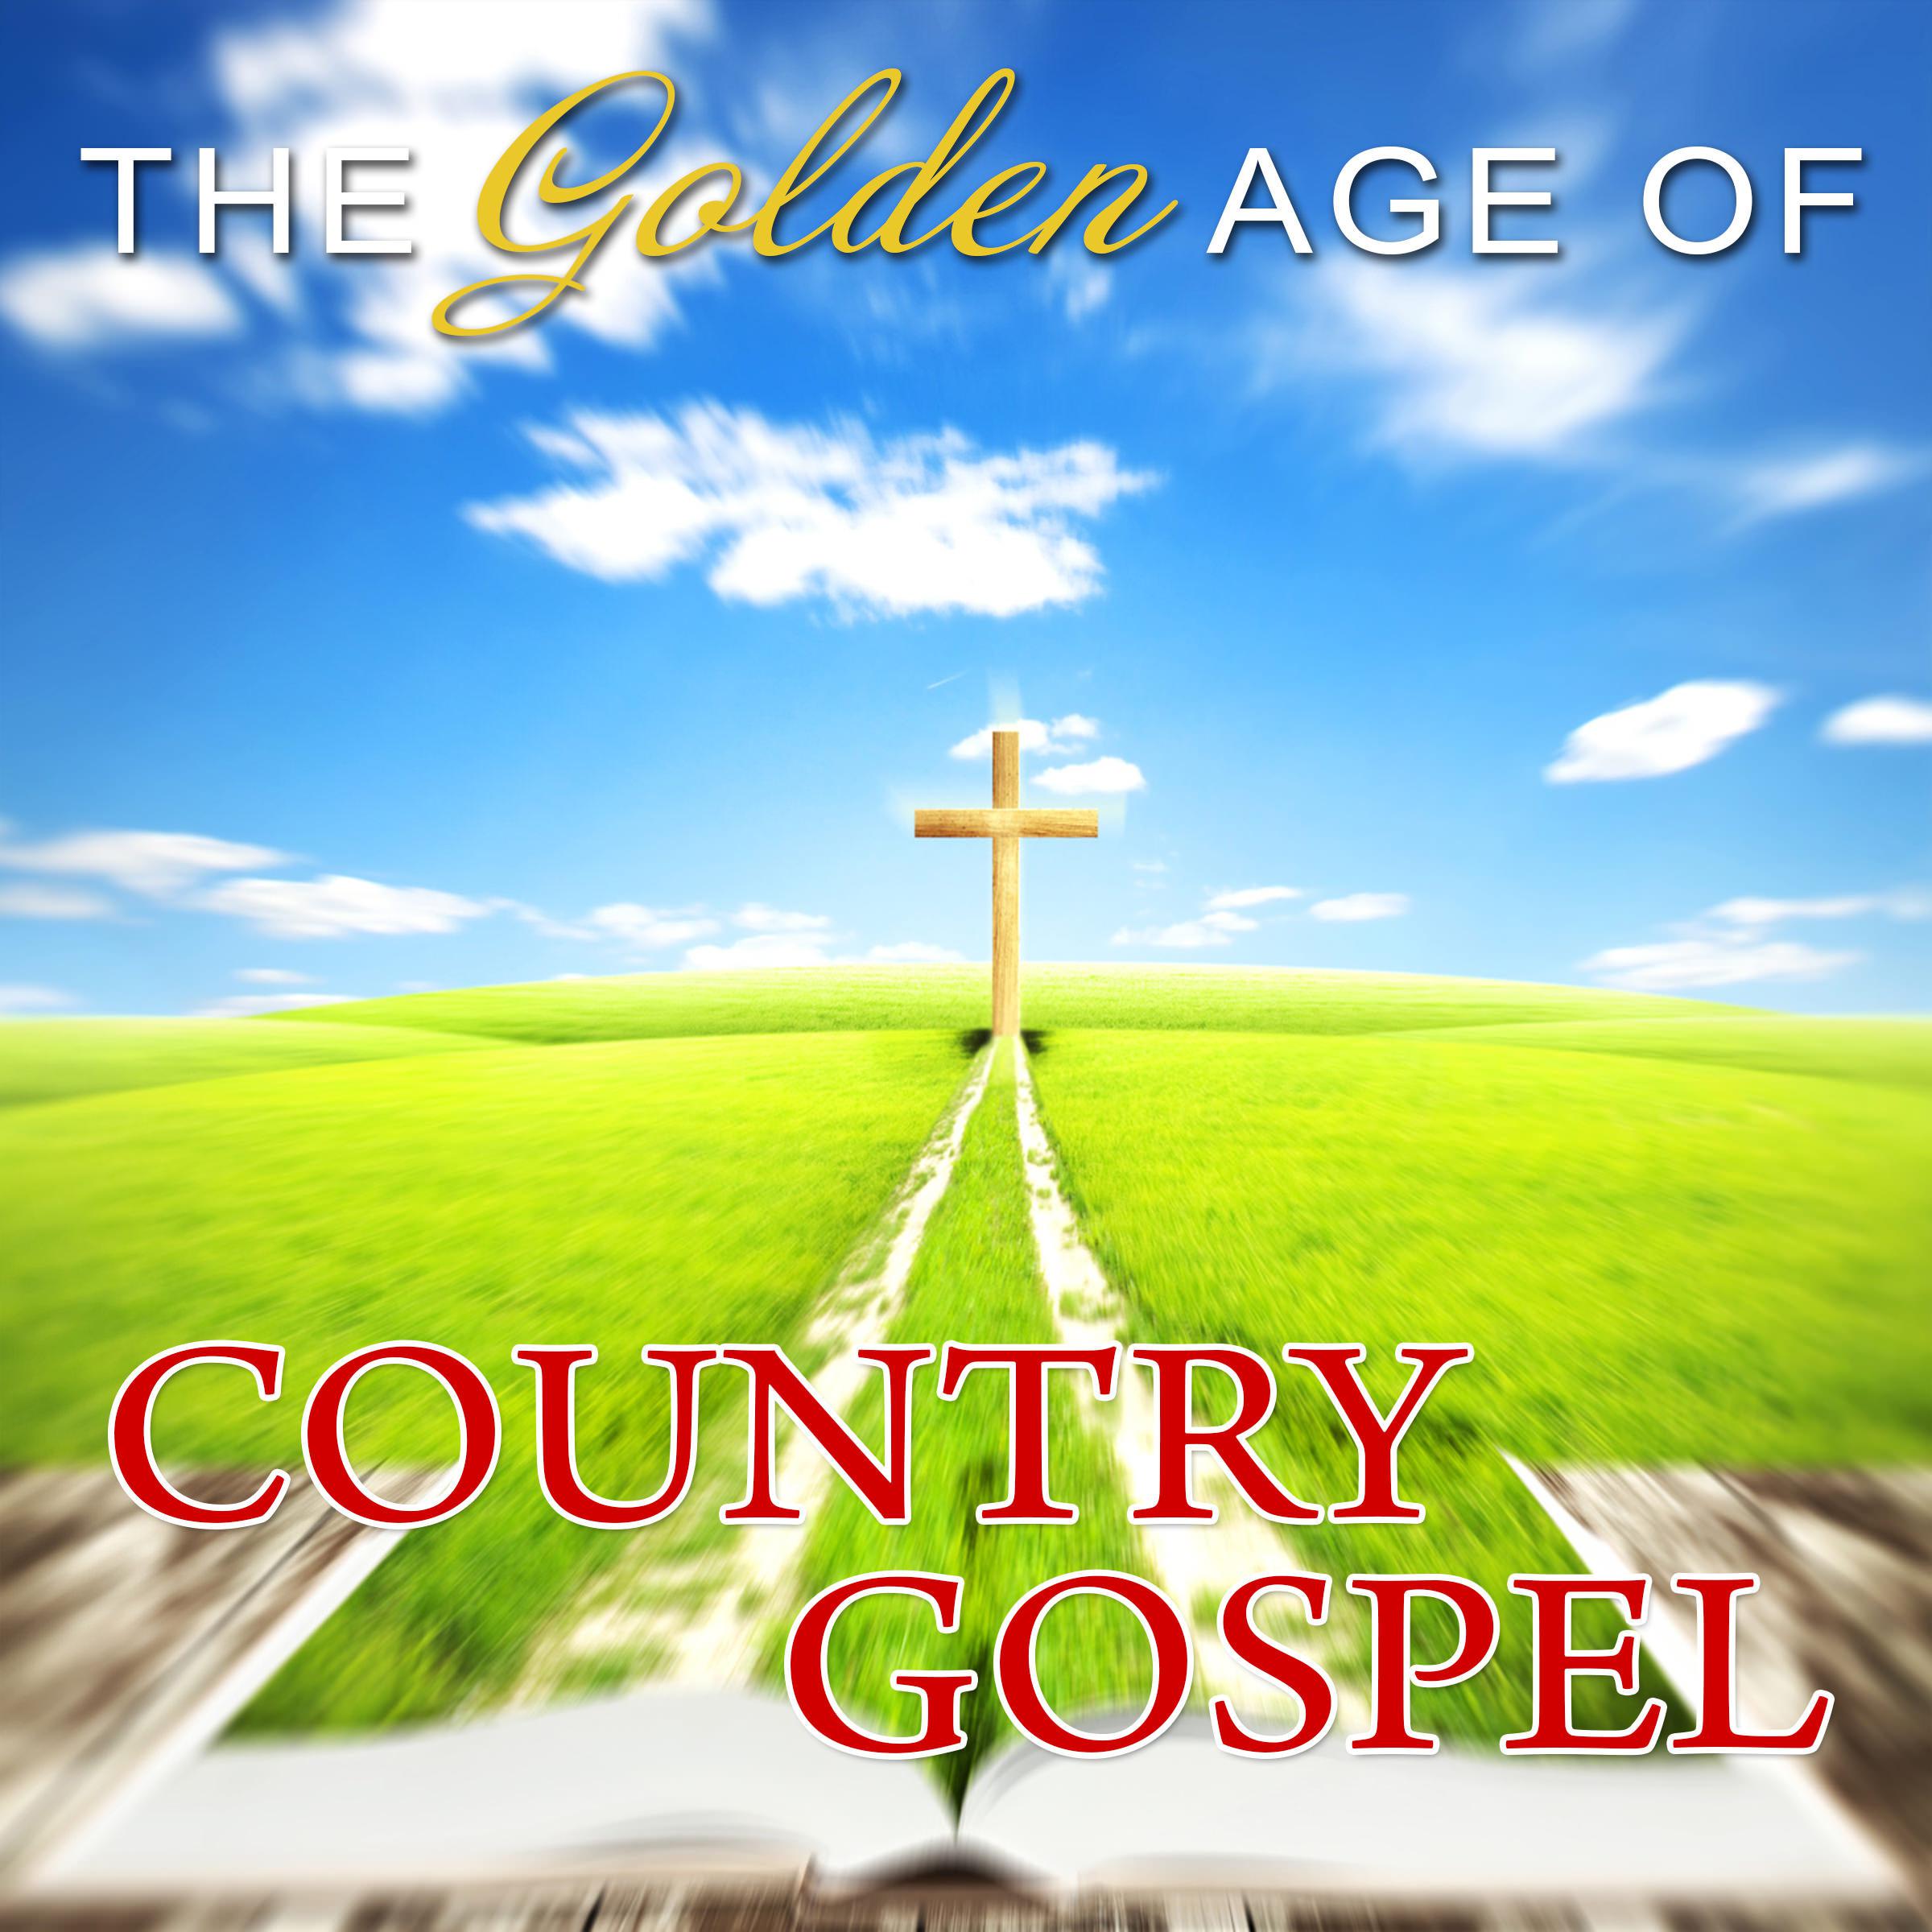 The Golden Age Of Country Gospel